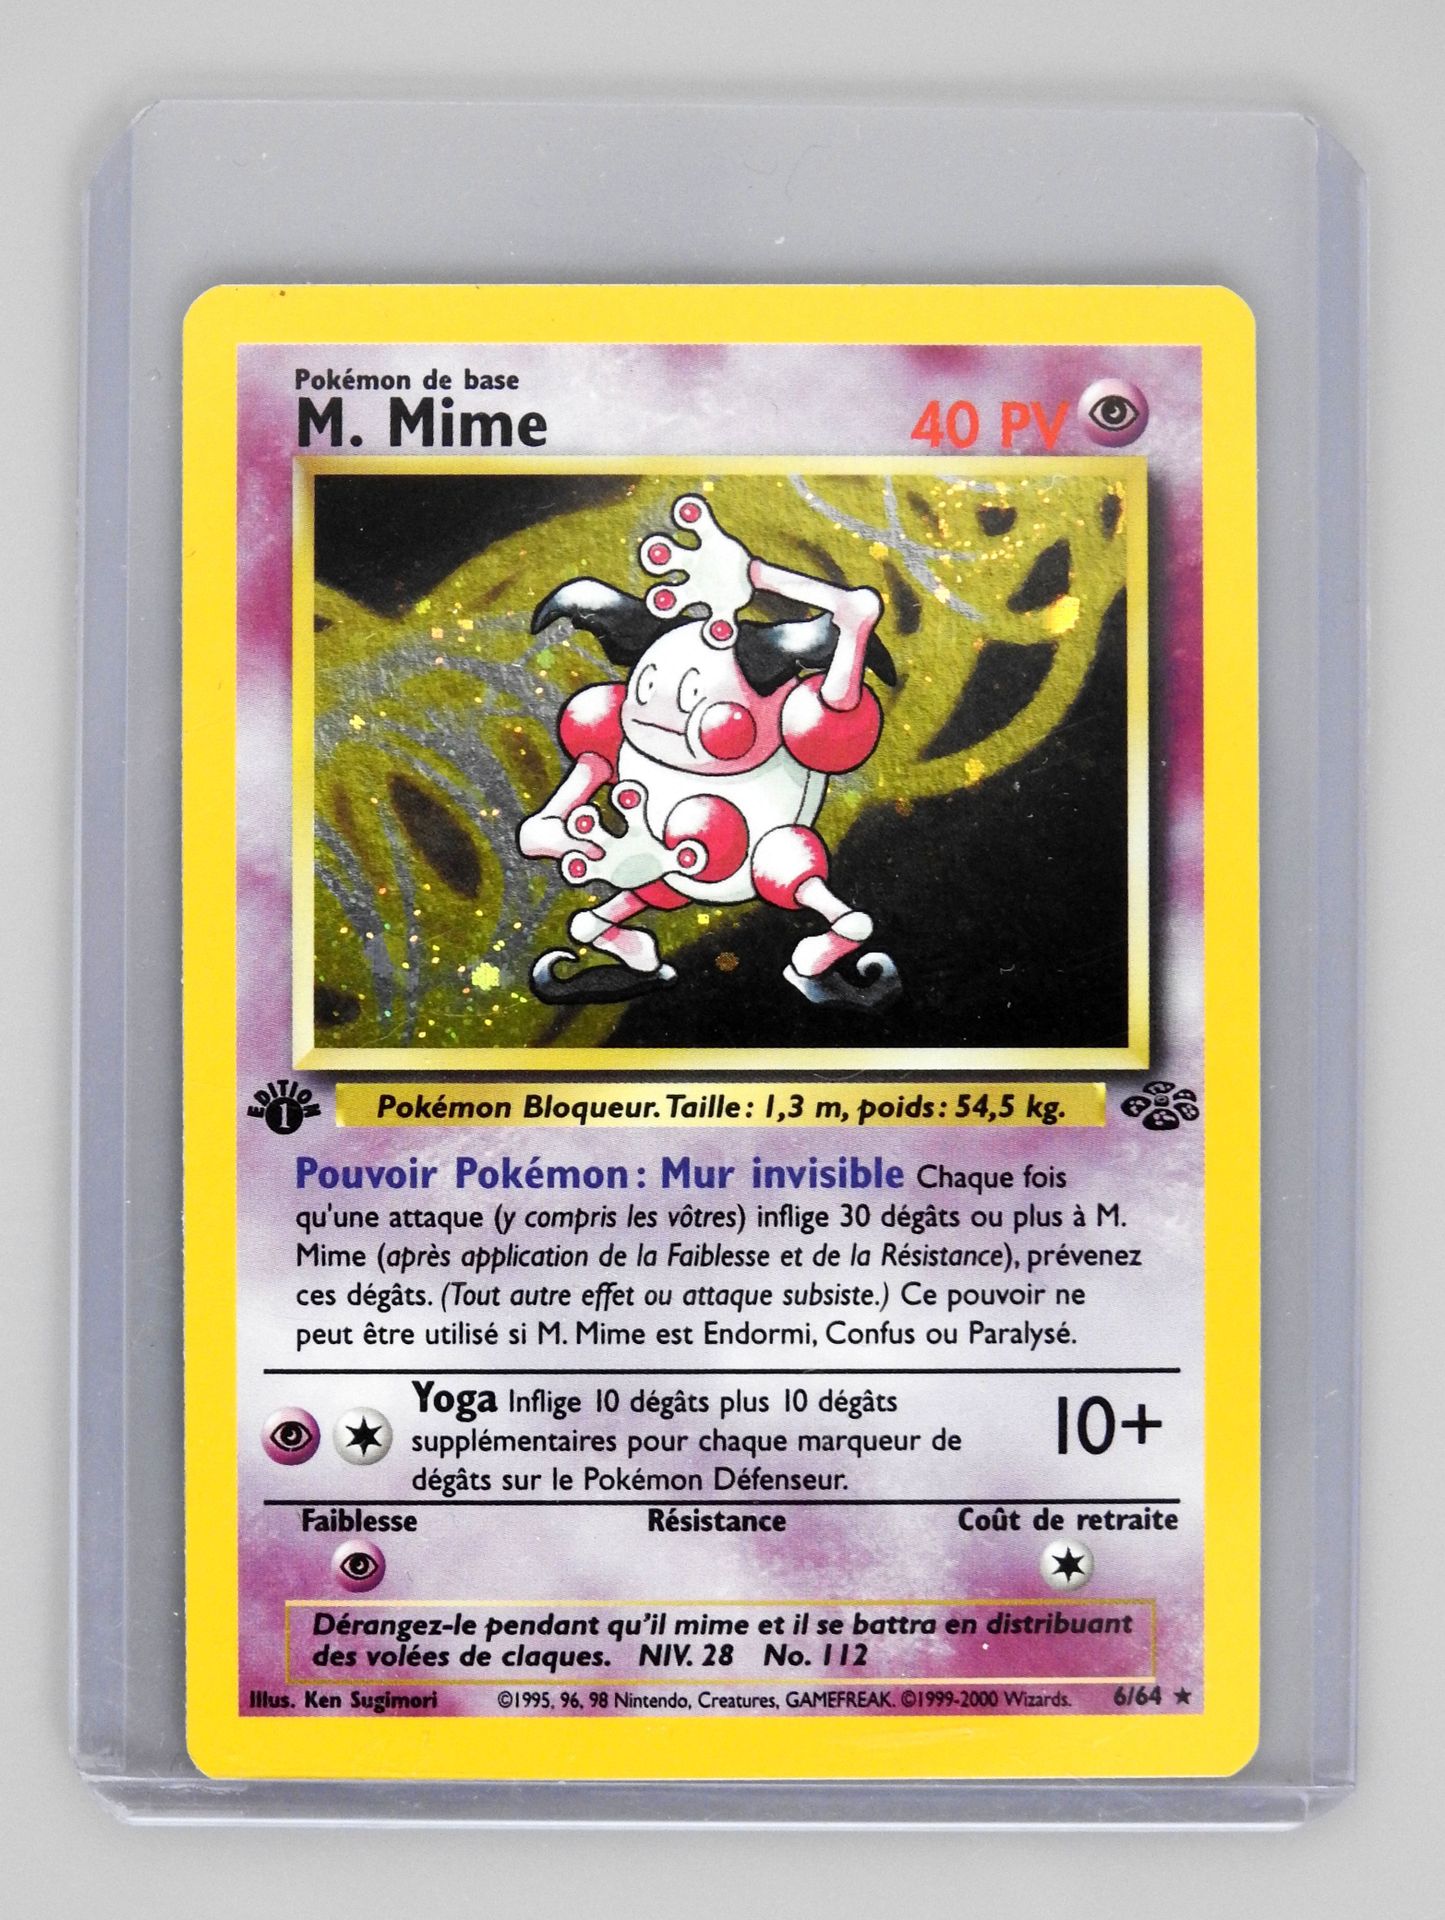 Null M MIME Ed 1

Wizards Jungle 6/64 block

Pokemon card in great condition